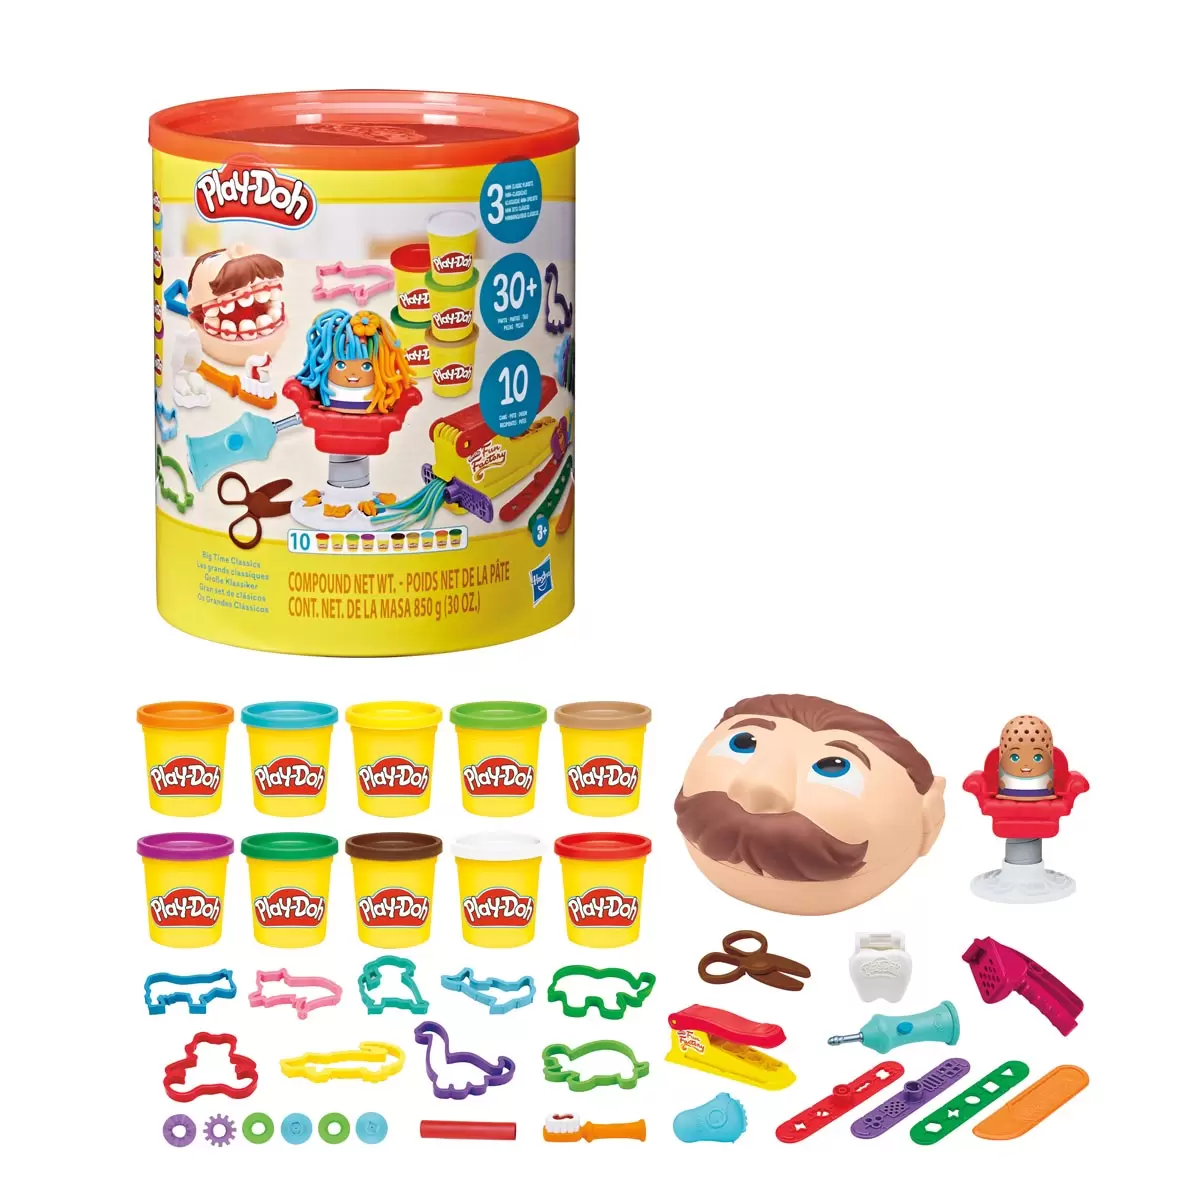 Buy Play Doh Cannister Items Image at Costco.co.uk